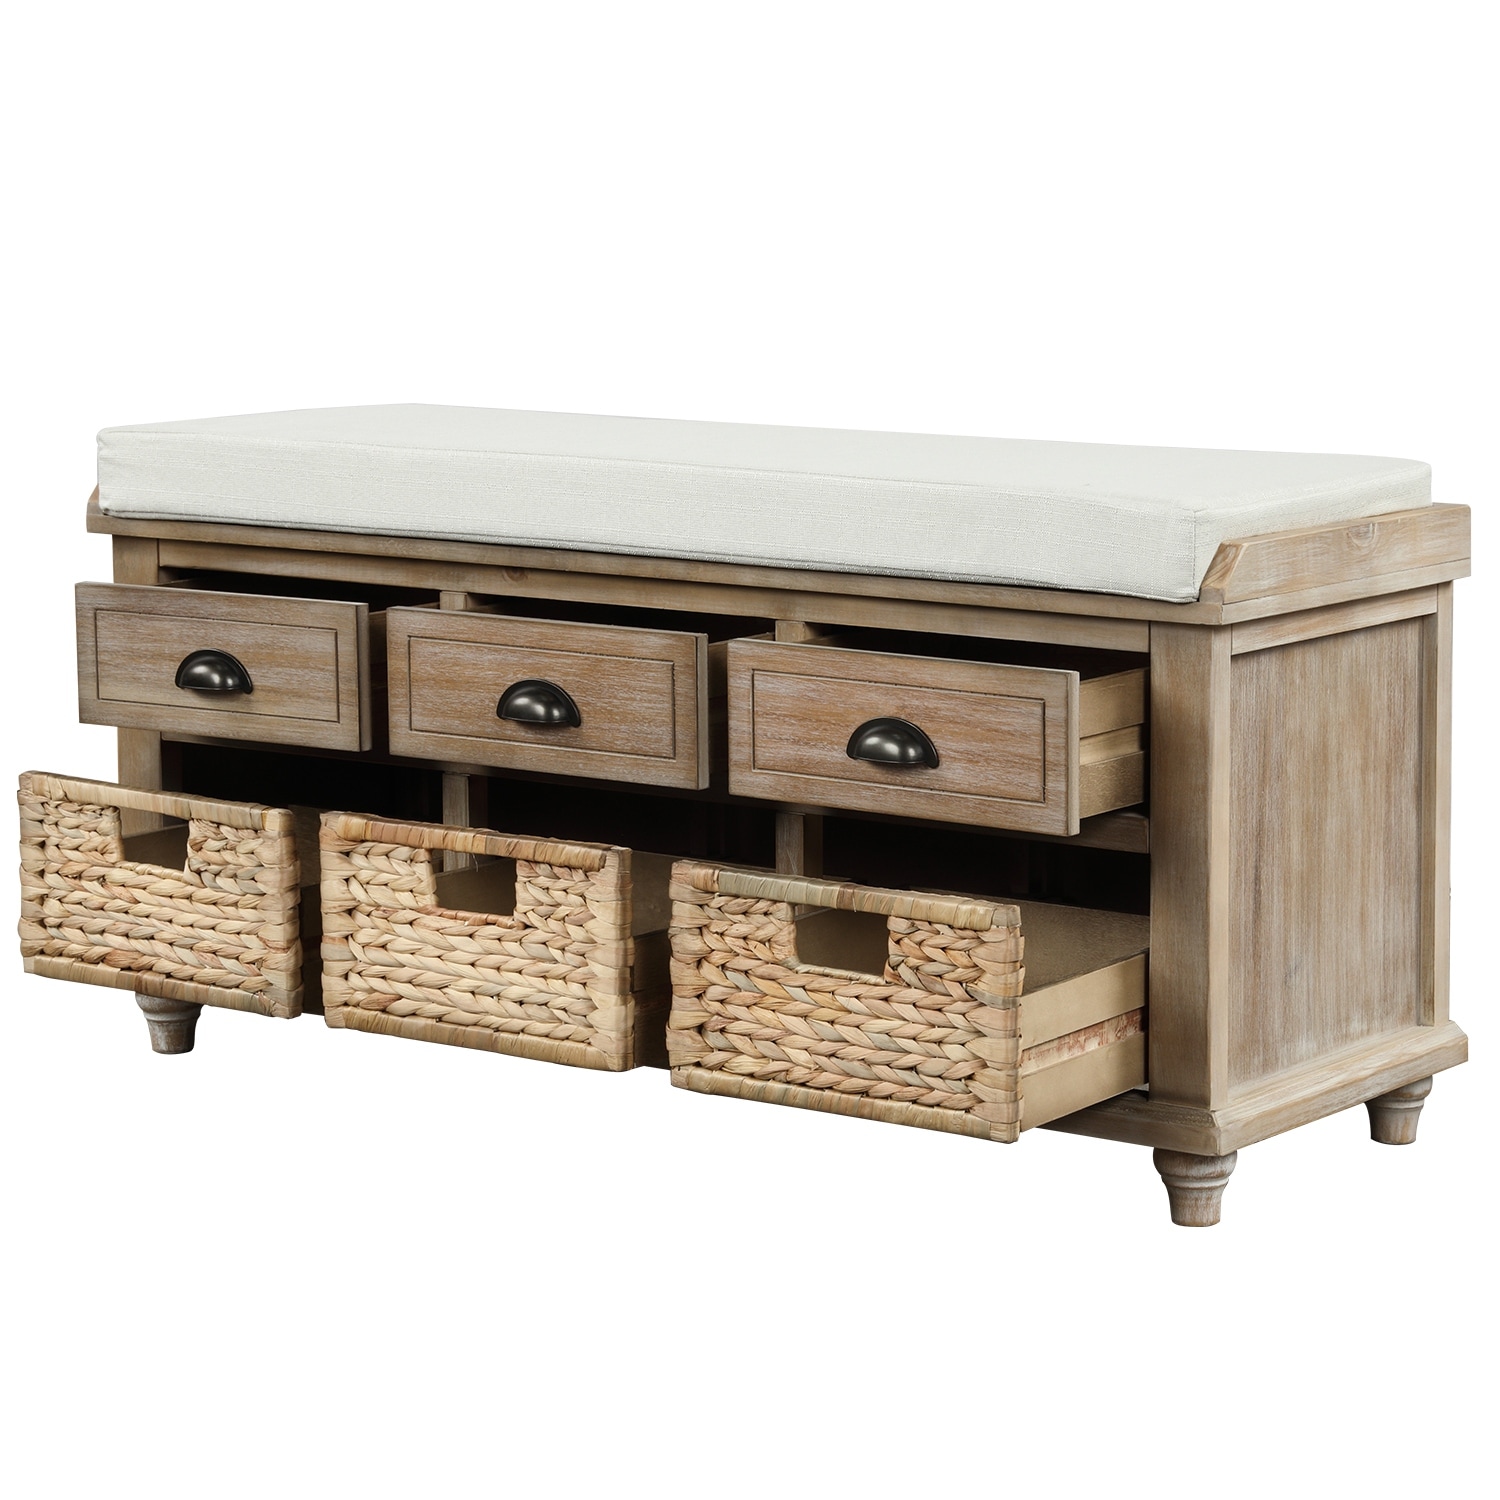 Rustic Storage Bench Solid Wood Entryway Bench with 3 Drawers and 3 Rattan Baskets Shoe Bench for Living Room